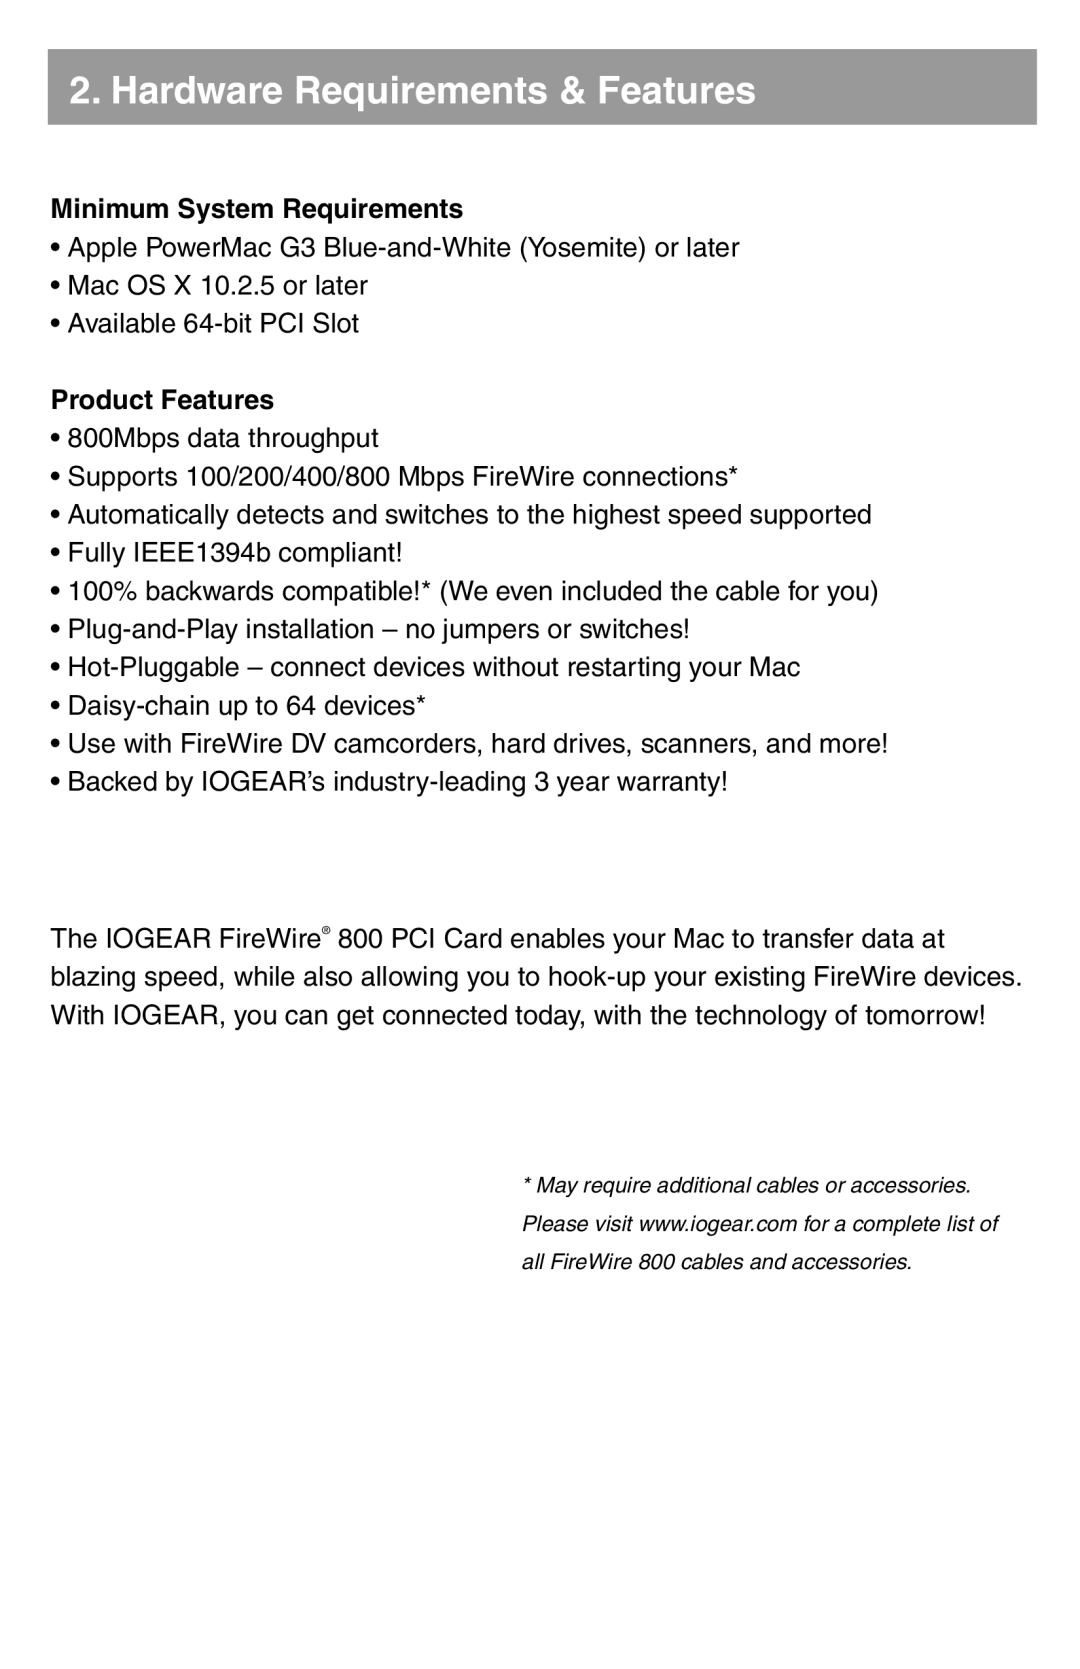 IOGear GIC3800 quick start Hardware Requirements & Features, Minimum System Requirements, Product Features 